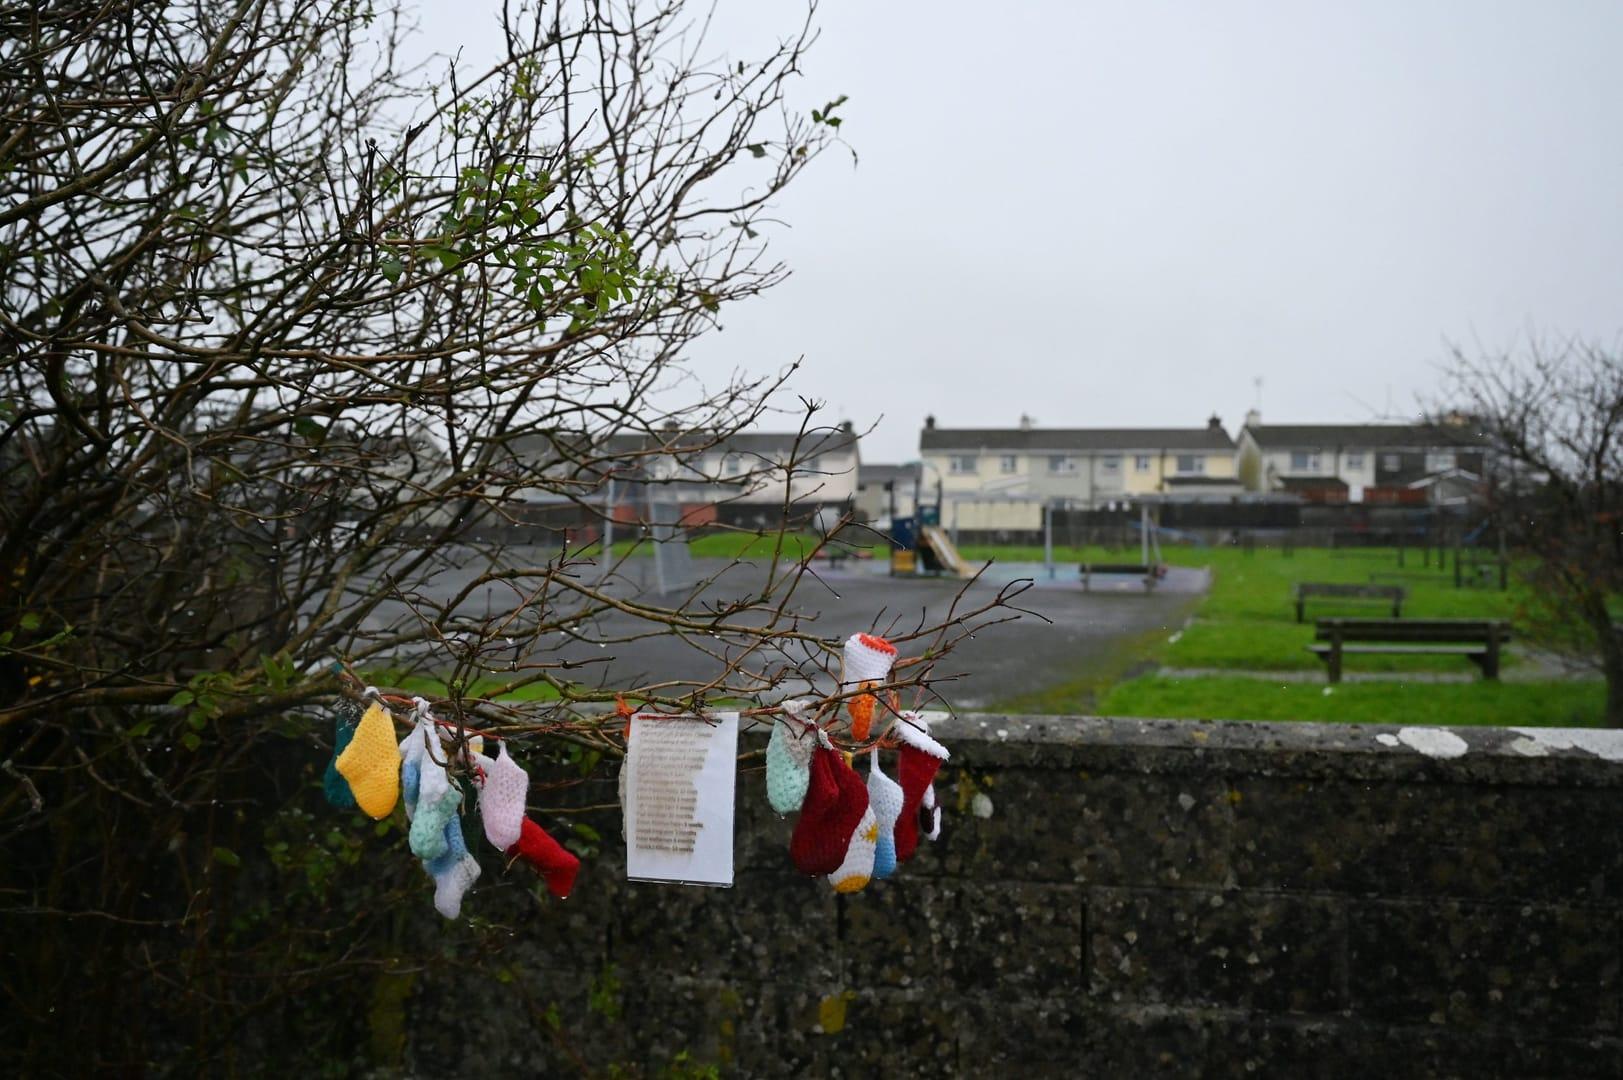 NIreland leader orders inquiry into homes for unwed mothers